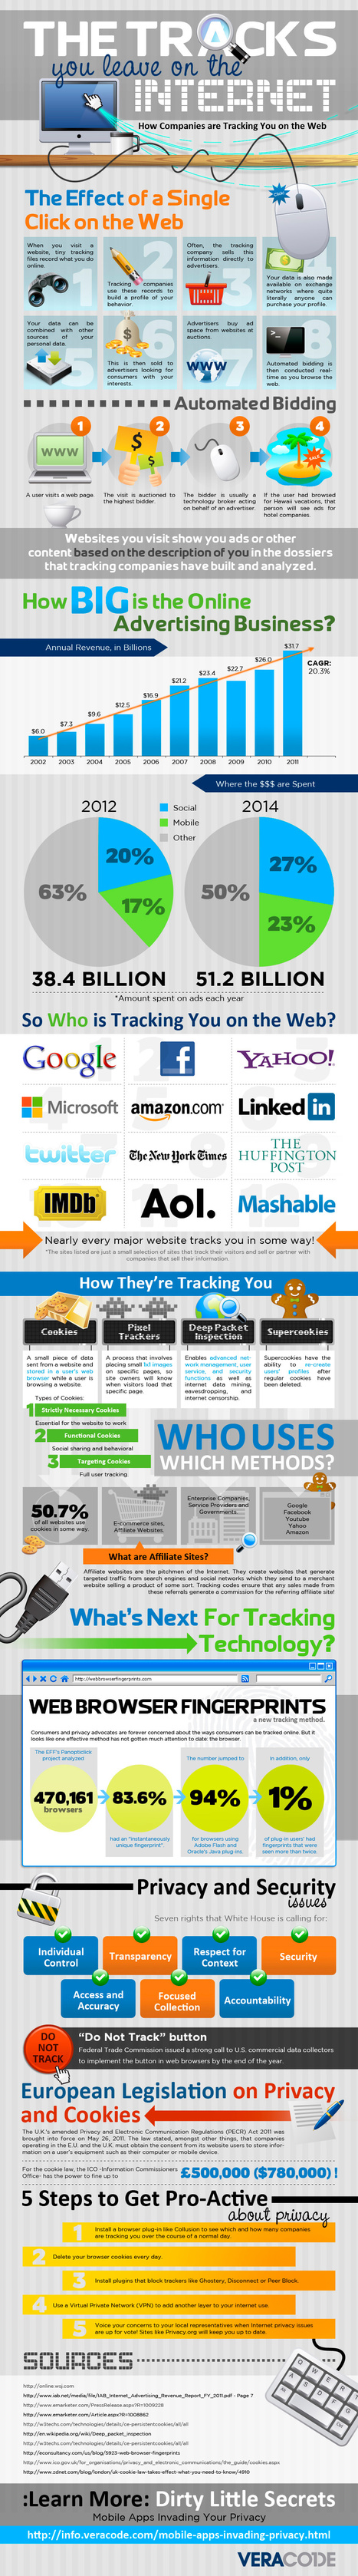 How Companies Track You on the Web [Infographic] | 21st Century Learning and Teaching | Scoop.it